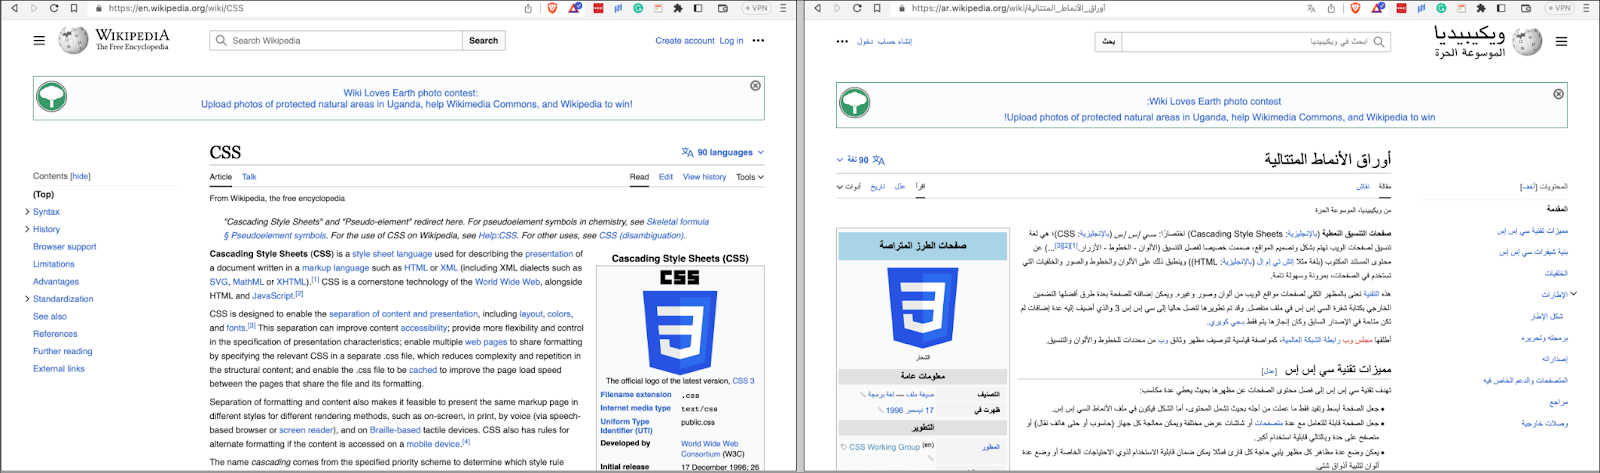 side-by-side image of a CSS Wikipedia page